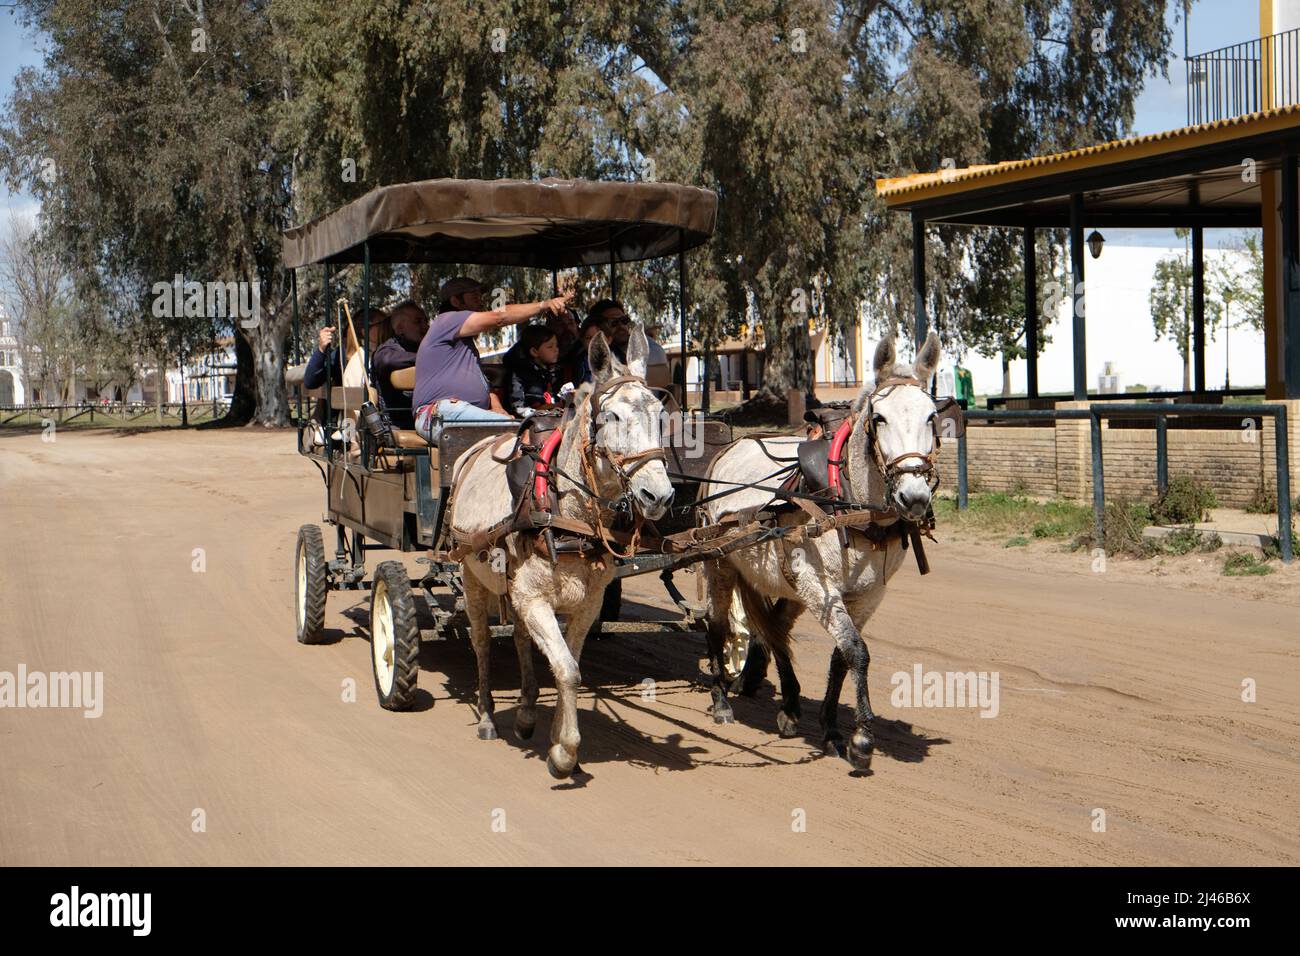 A pair of white mules pull a sightseeing tourist carriage throught the sandy streets of El Rocio in Andalucia, Spain Stock Photo